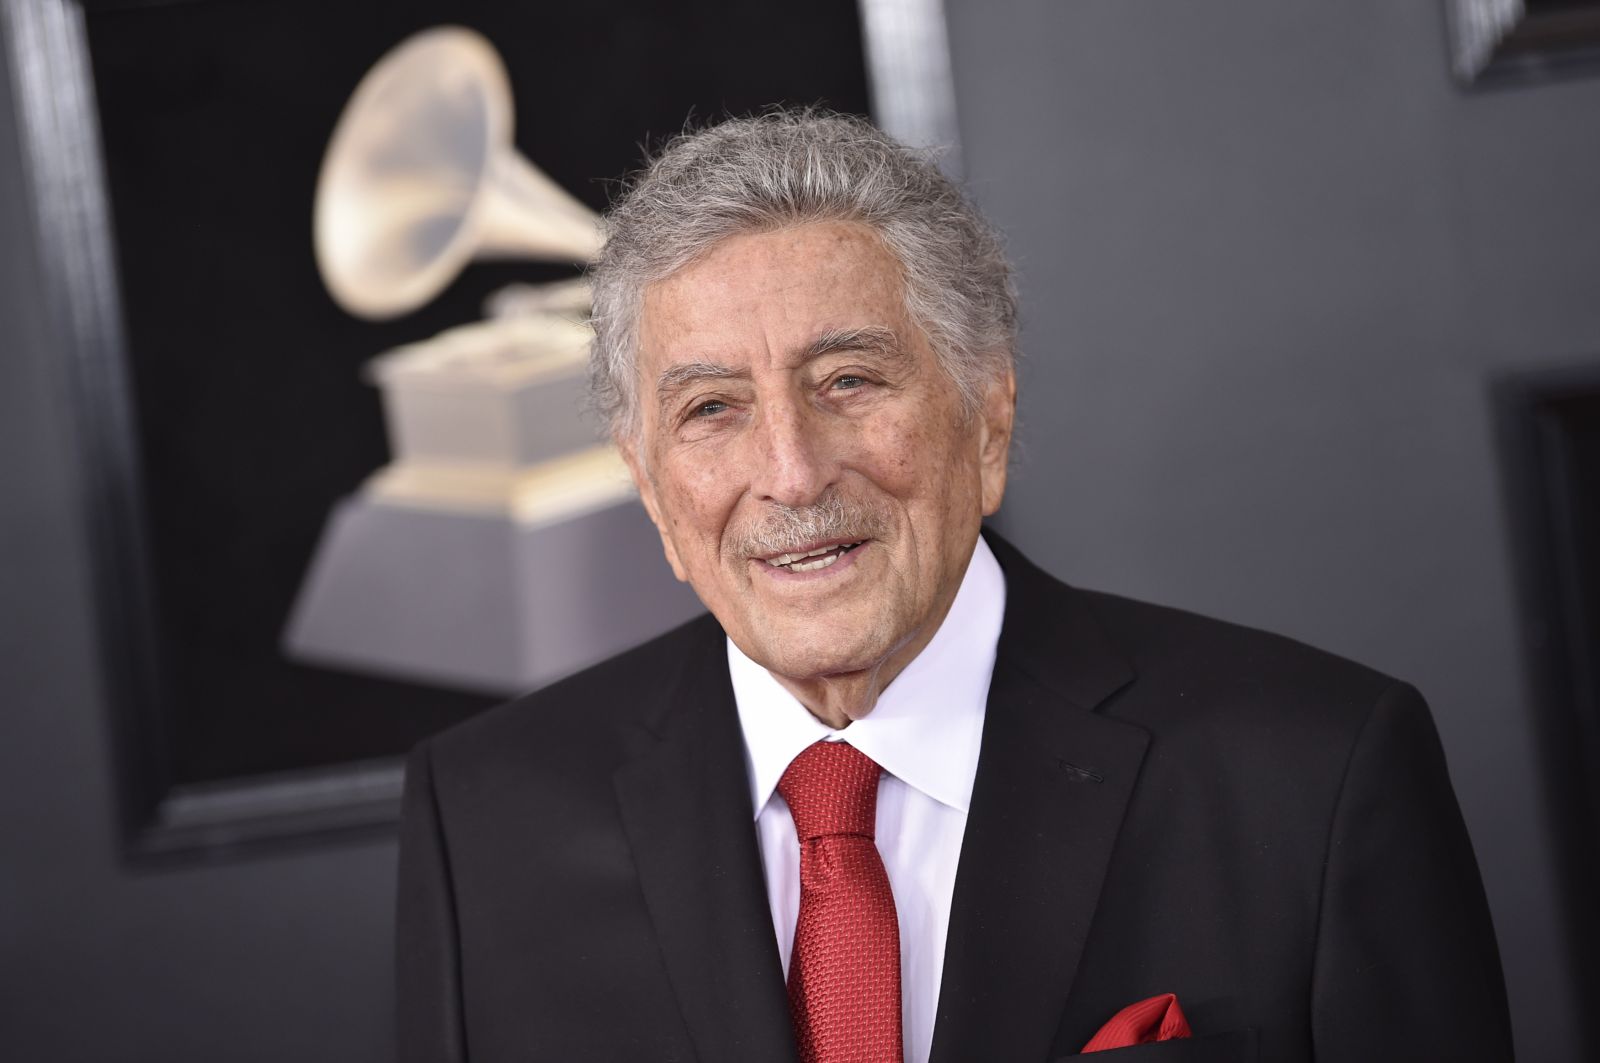 FILE - Tony Bennett arrives at the 60th annual Grammy Awards at Madison Square Garden on Sunday, Jan. 28, 2018, in New York. Bennett, the eminent and timeless stylist whose devotion to classic American songs and knack for creating new standards such as "I Left My Heart In San Francisco" graced a decadeslong career that brought him admirers from Frank Sinatra to Lady Gaga, died Friday, July 21, 2023. He was 96. (Photo by Evan Agostini/Invision/AP, File)